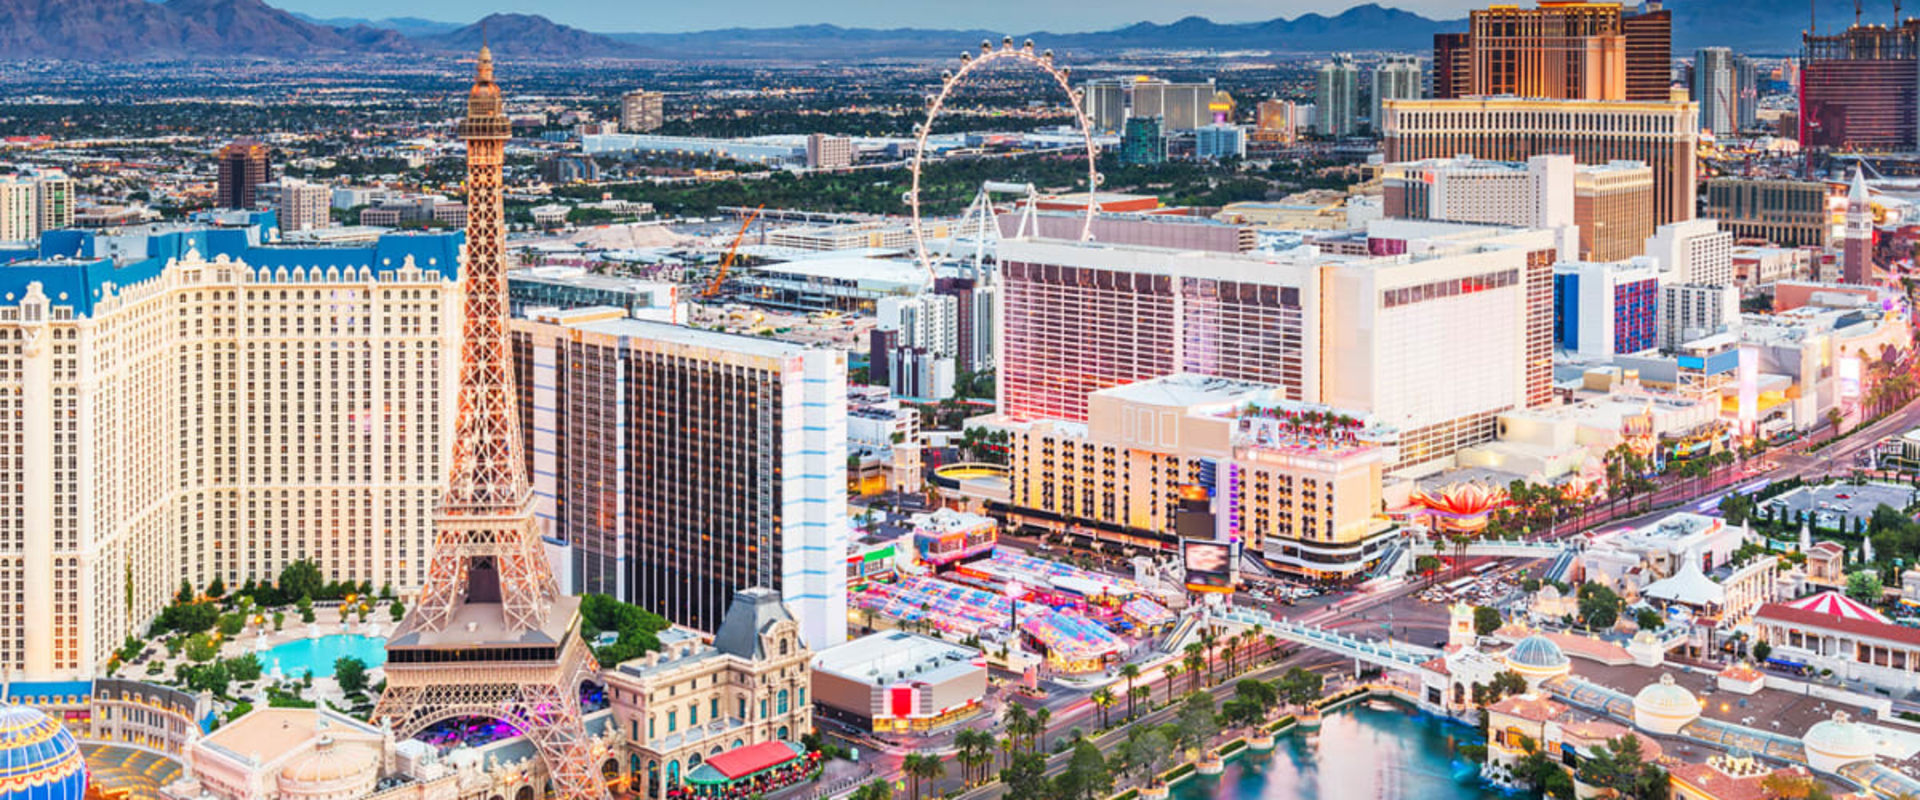 What Exciting Projects are Happening in Las Vegas, Nevada?